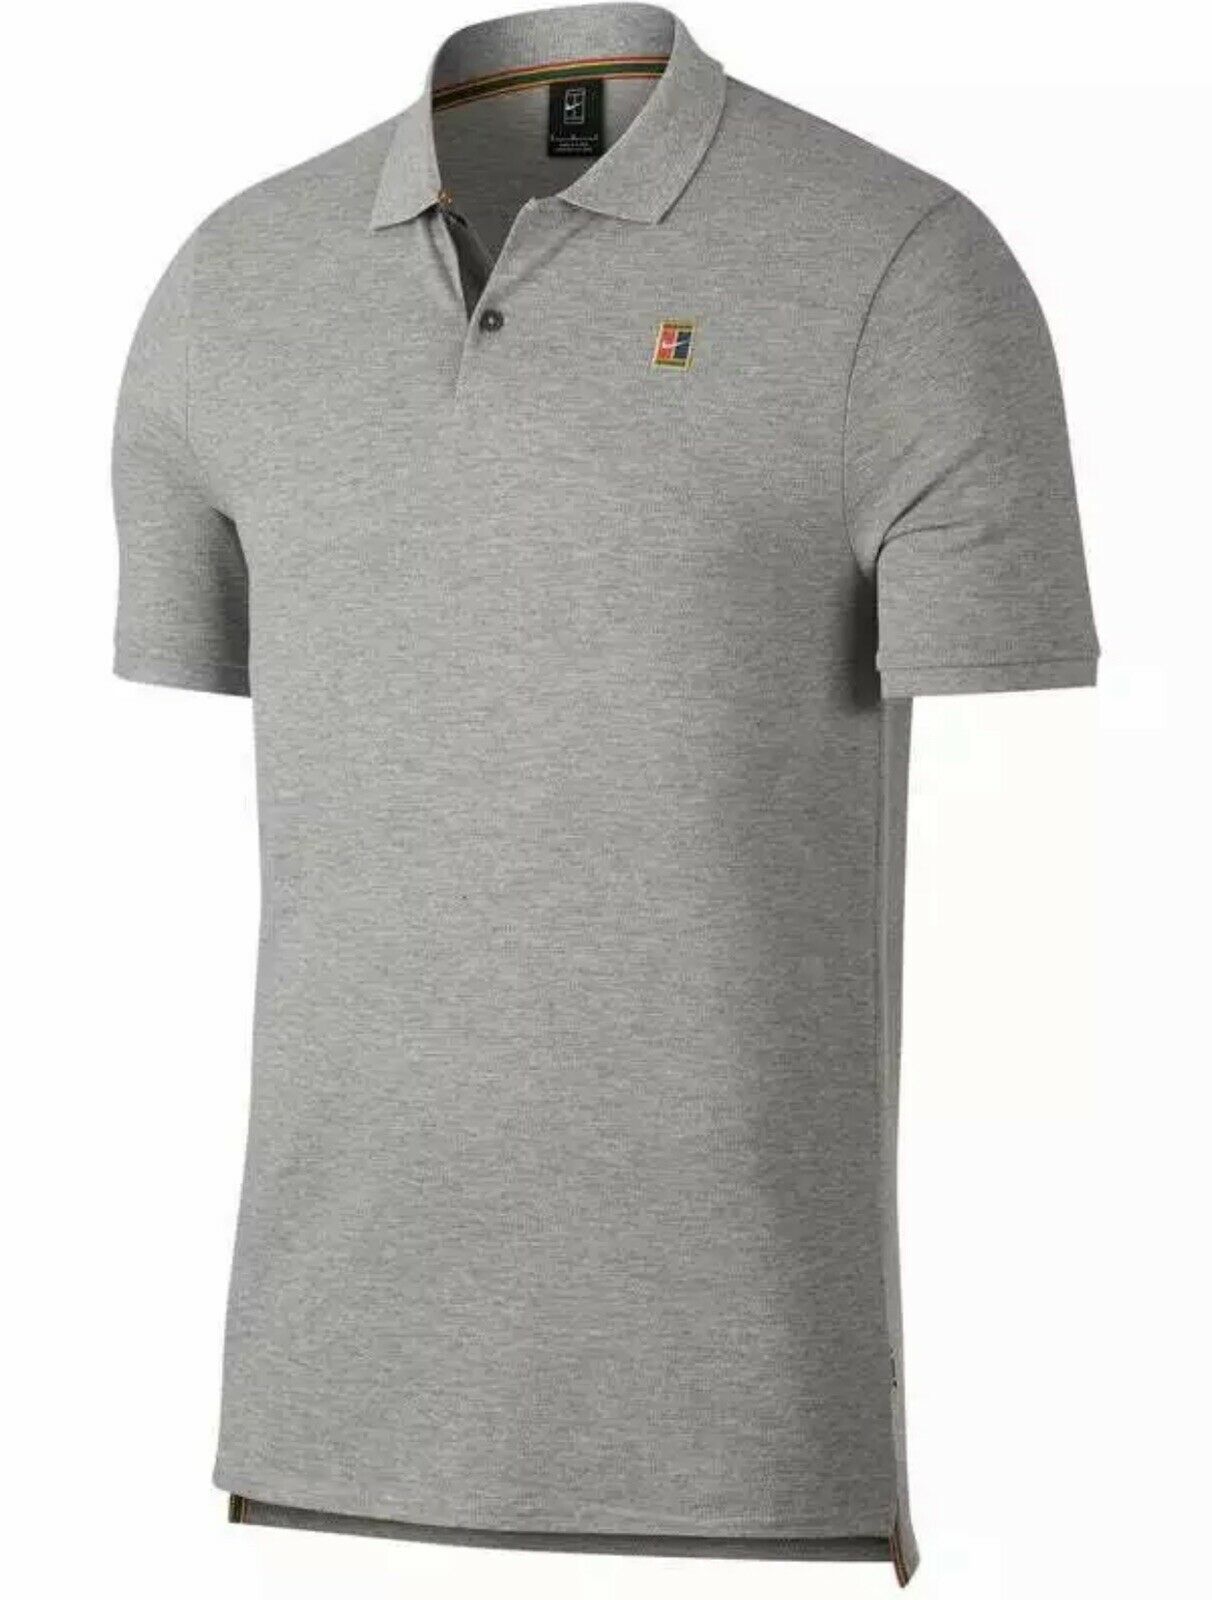 Nike Mens Court Heritage Slim Fit Pique Tennis Polo Heather Gray 934656-036 - L